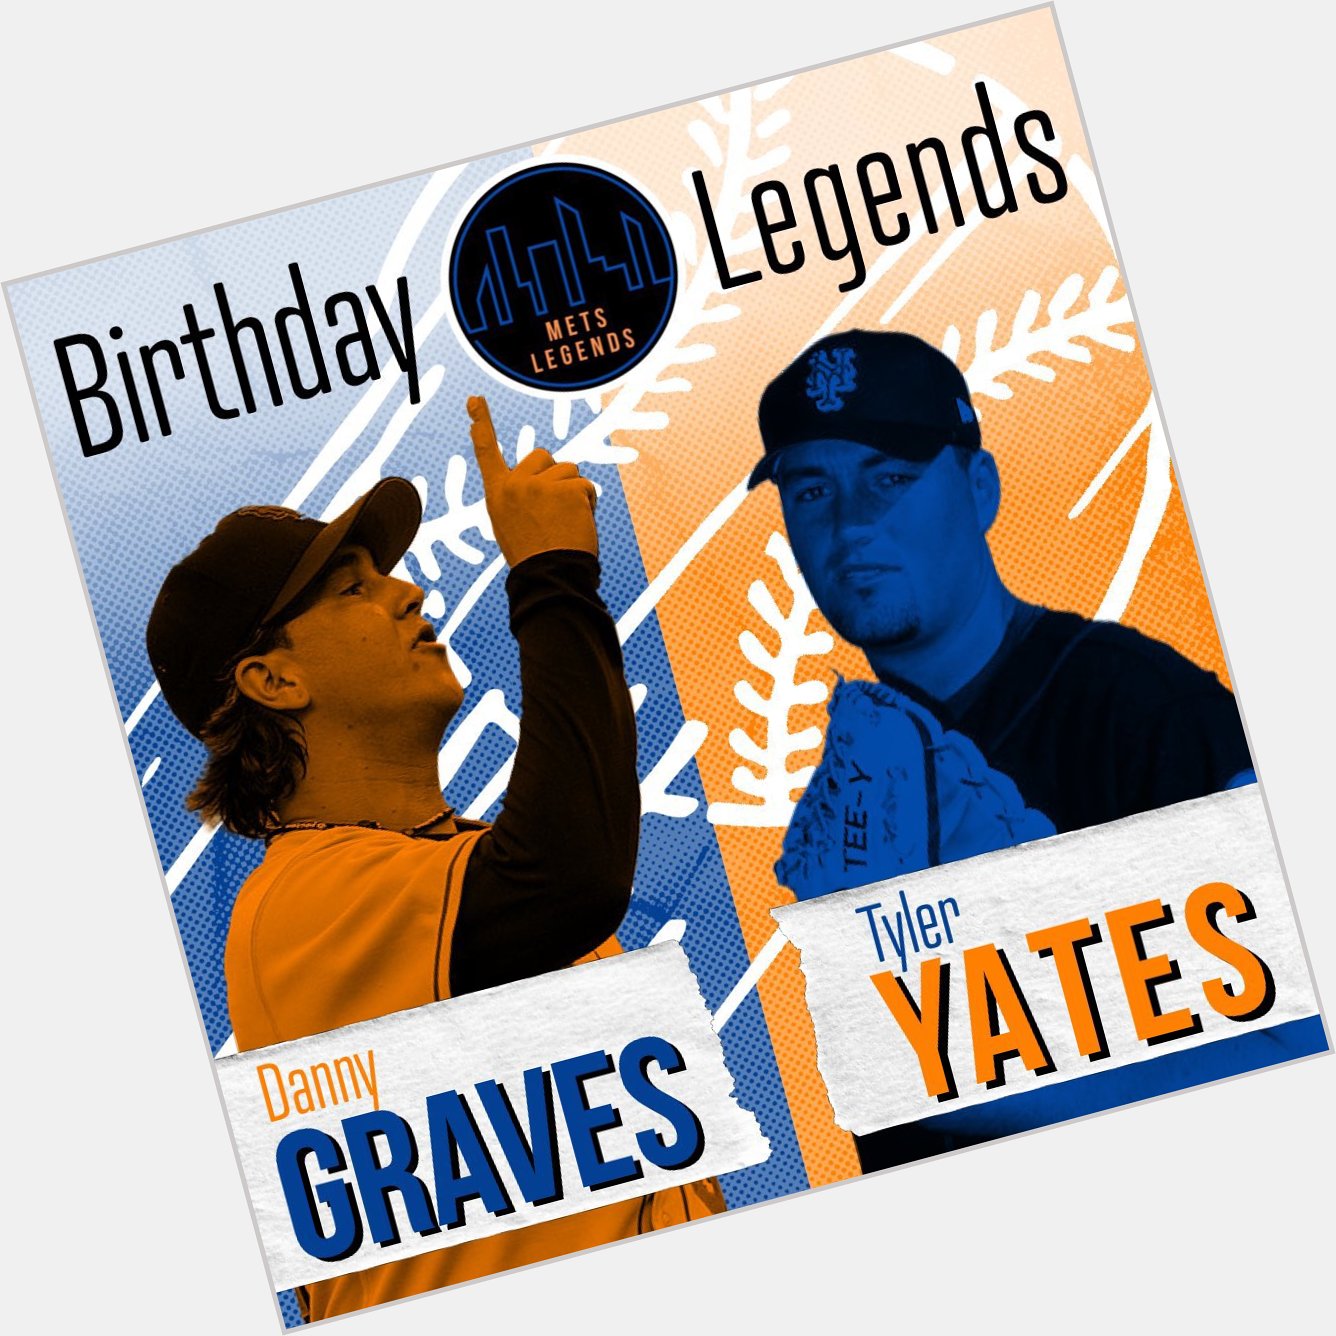 Woot woot! Legendary birthday watch! 

Happy Birthday to former pitchers Danny Graves and Tyler Yates! 